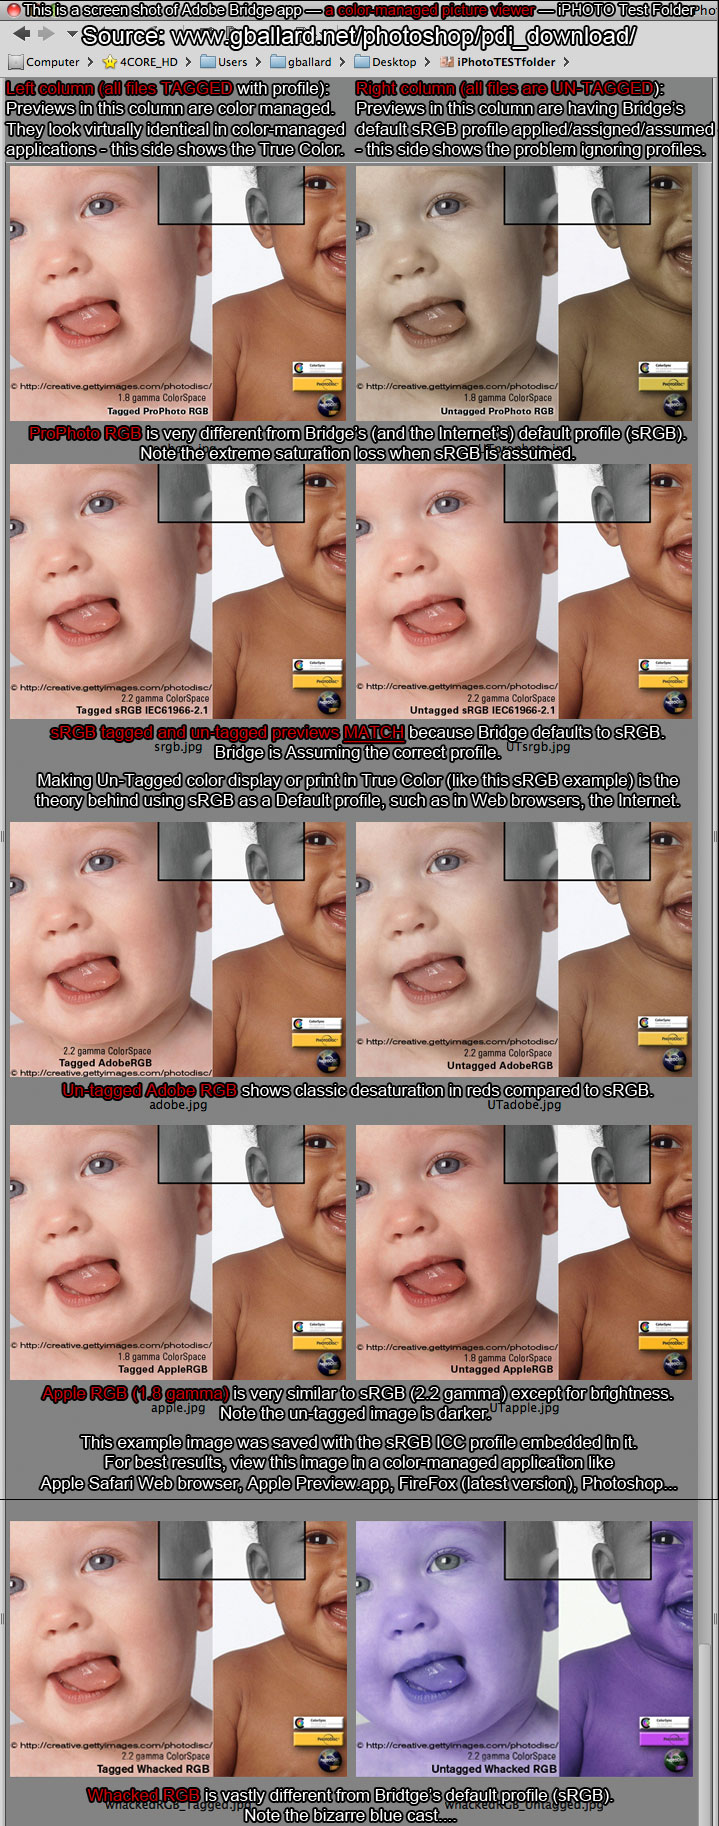 Download Pdi Test Image Photodisc Color Management Calibration Target Reference Image Baby Faces How To Achieve True Print Color